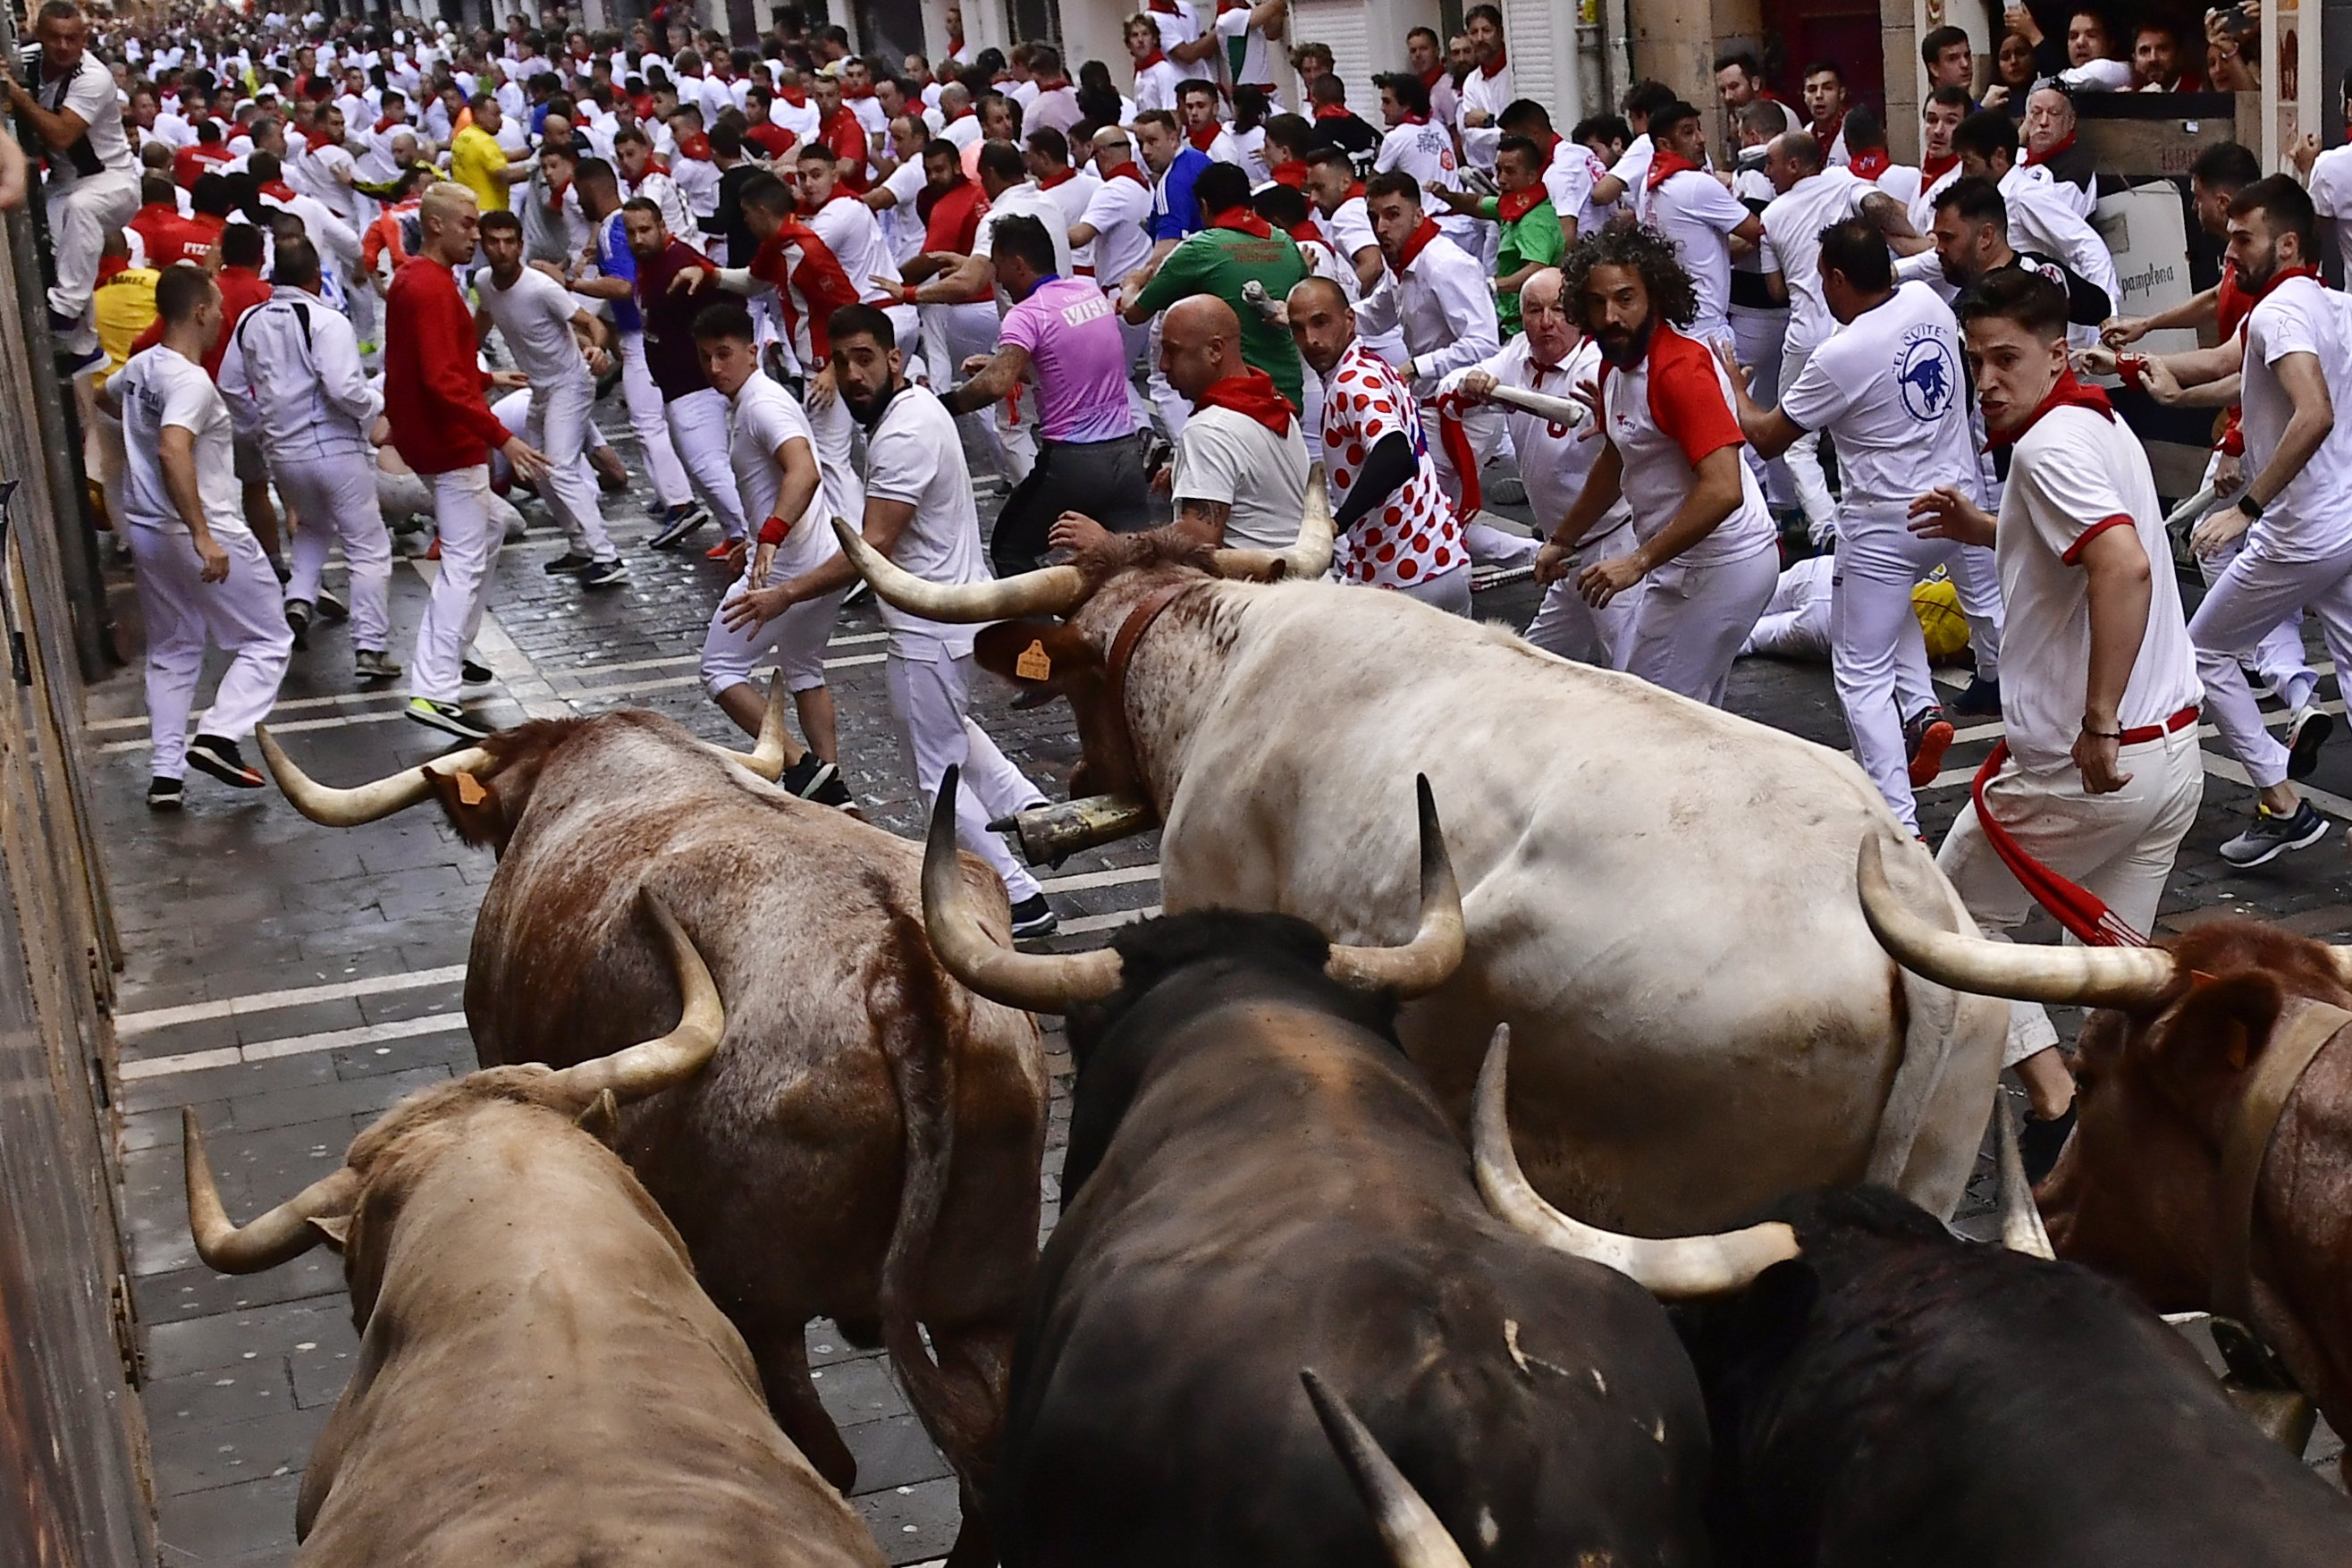 Runners hit Pamplona's streets for annual dash with the bulls